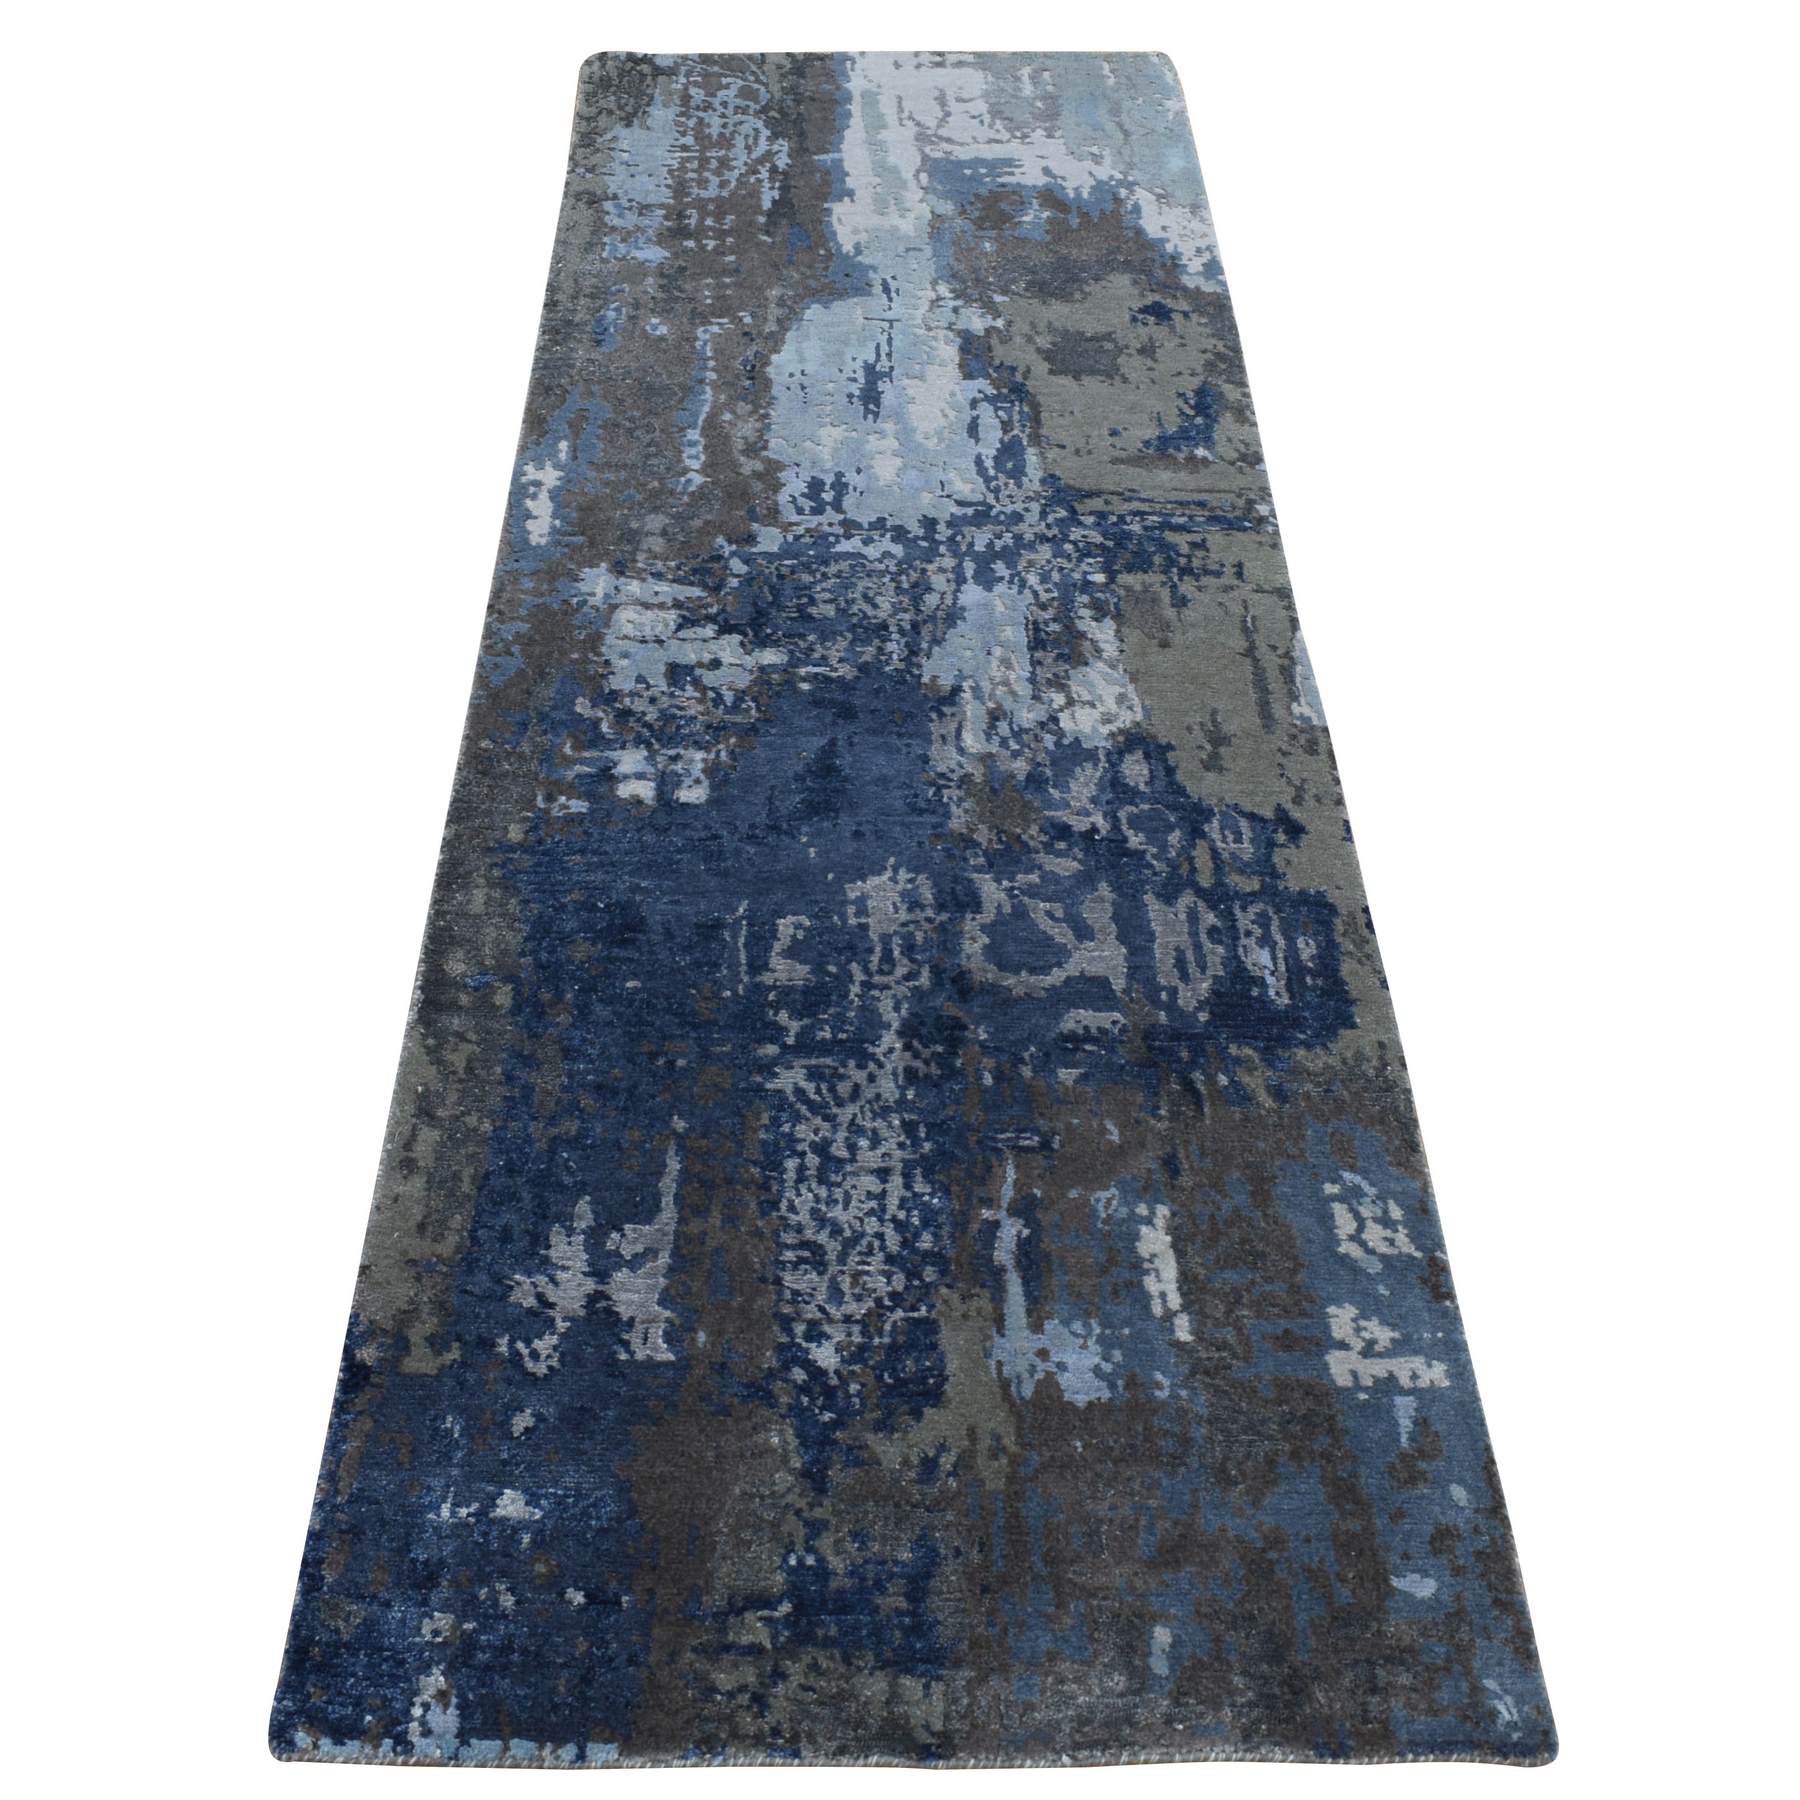 Prussian Blue, Hand Knotted, Abstract Design, Wool and Silk, Hi-Lo Pile,  Runner Oriental Rug- Product:Prussian-Blue-Hand-Knotted-Abstract-Design-Wool -and-Silk-Hi-Lo-Pile-Runner-Oriental-Rug-436040